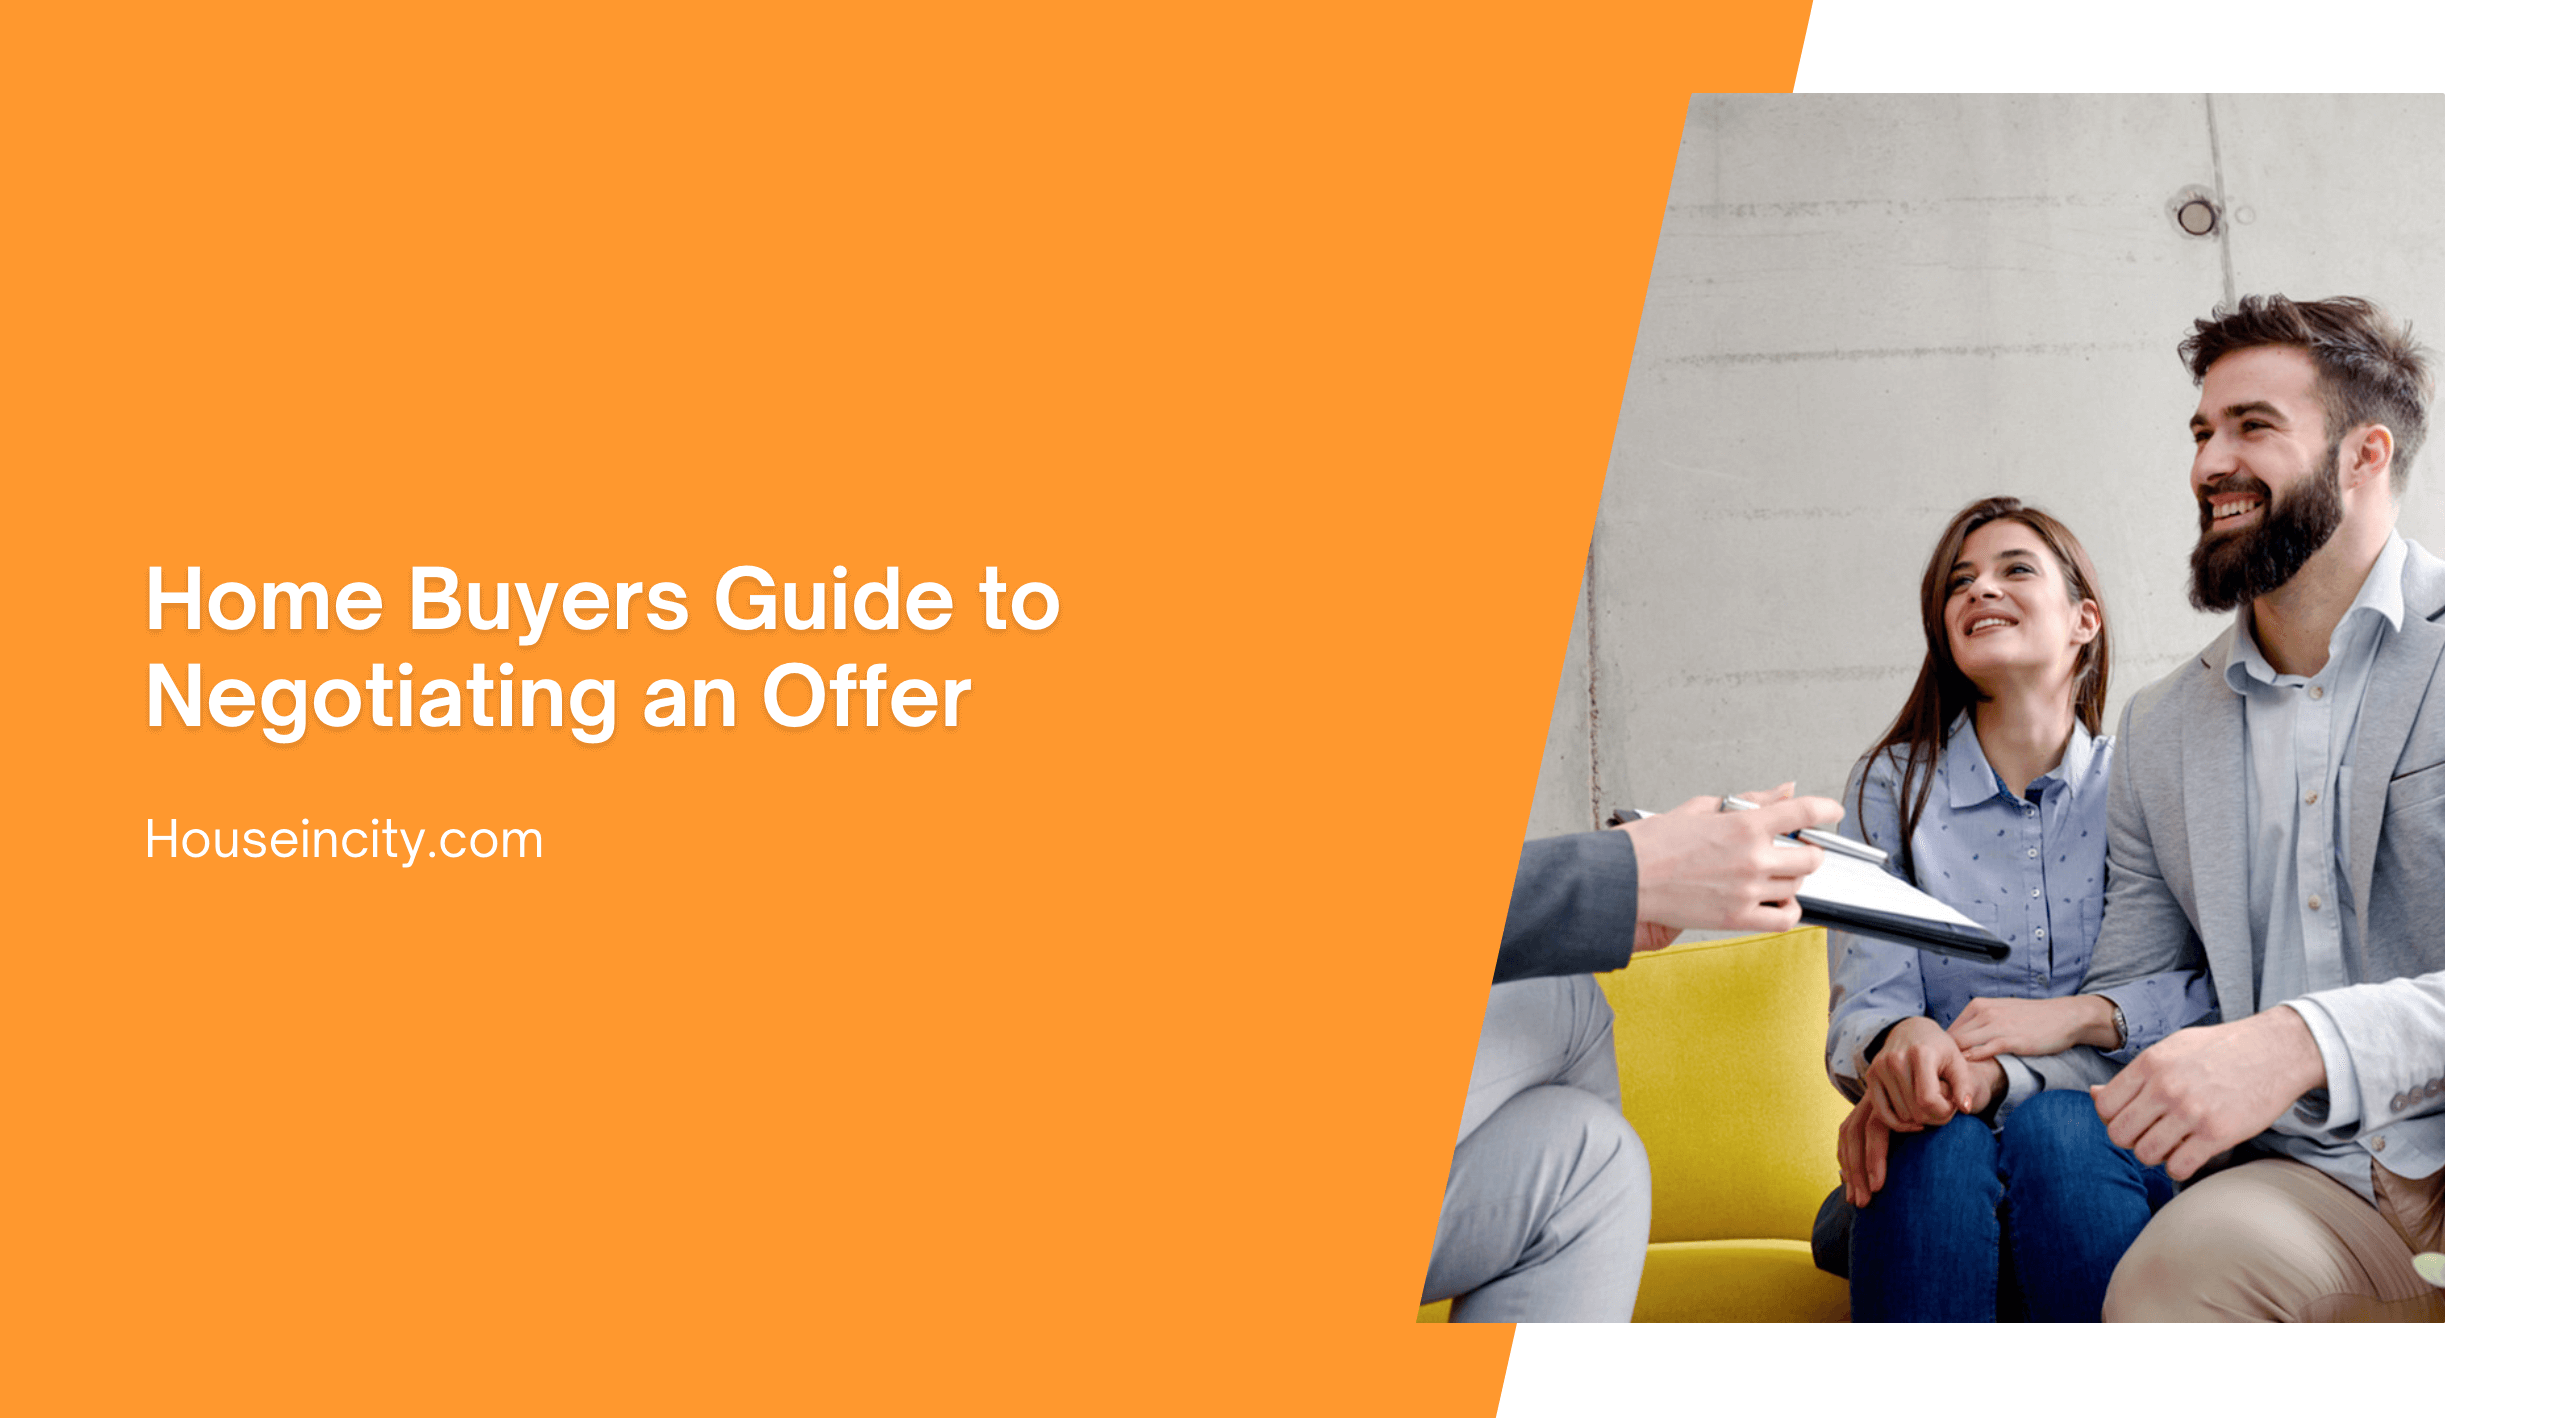 Home Buyers Guide to Negotiating an Offer